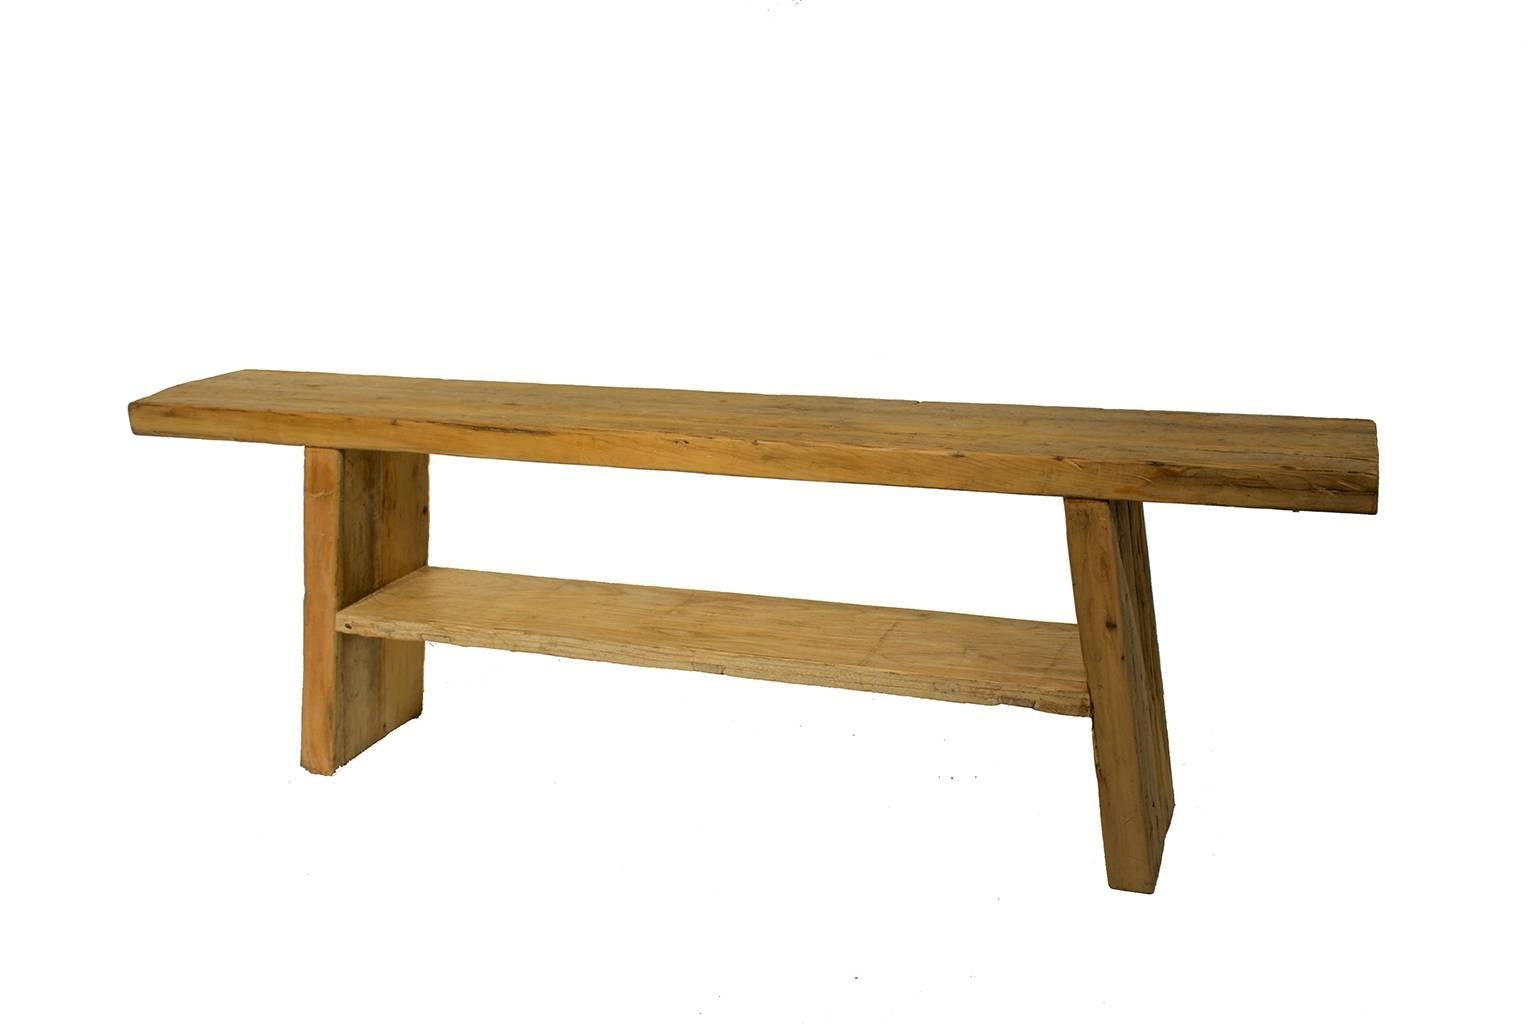 Console table in the style of Wabi Sabi made from reclaimed elm.